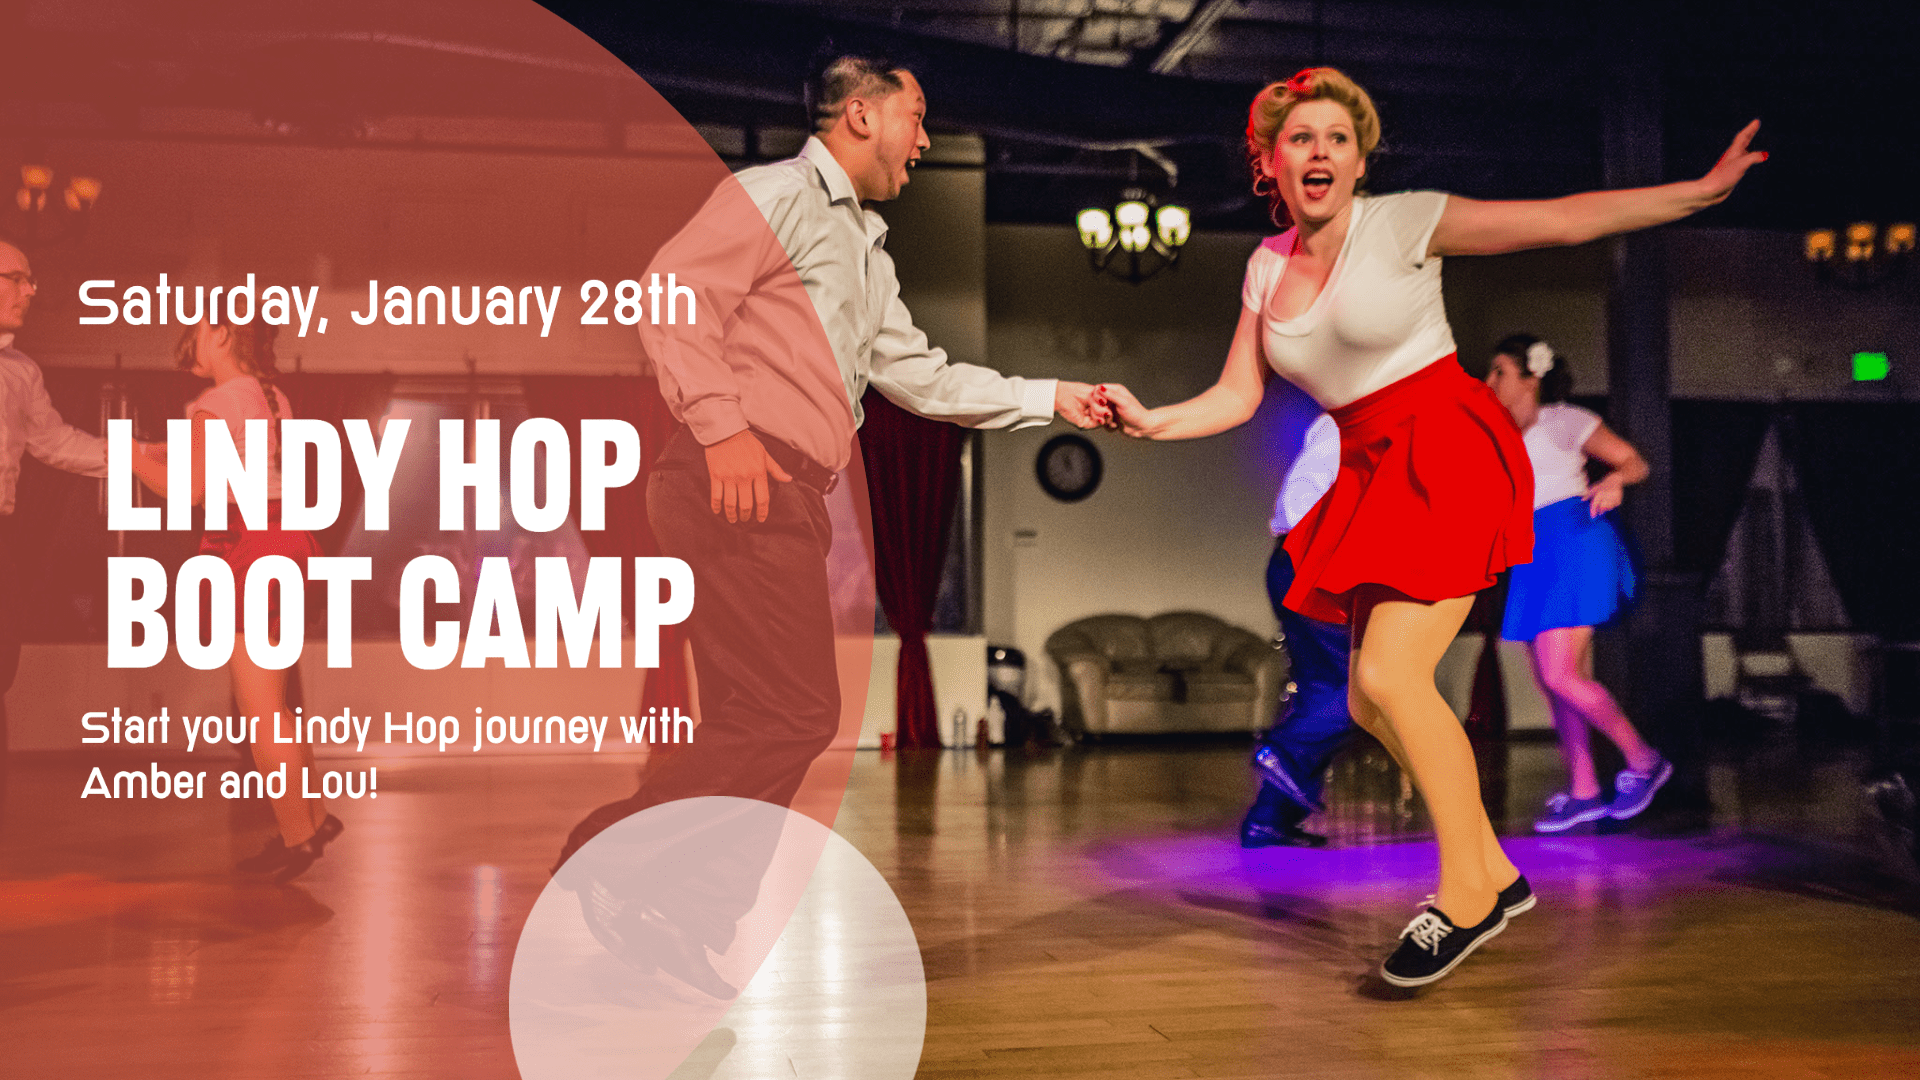 An image for Spotlight Ballroom's Lindy Hop Boot Camp on January 28th. The image features two dancers doing dancing Lindy Hop